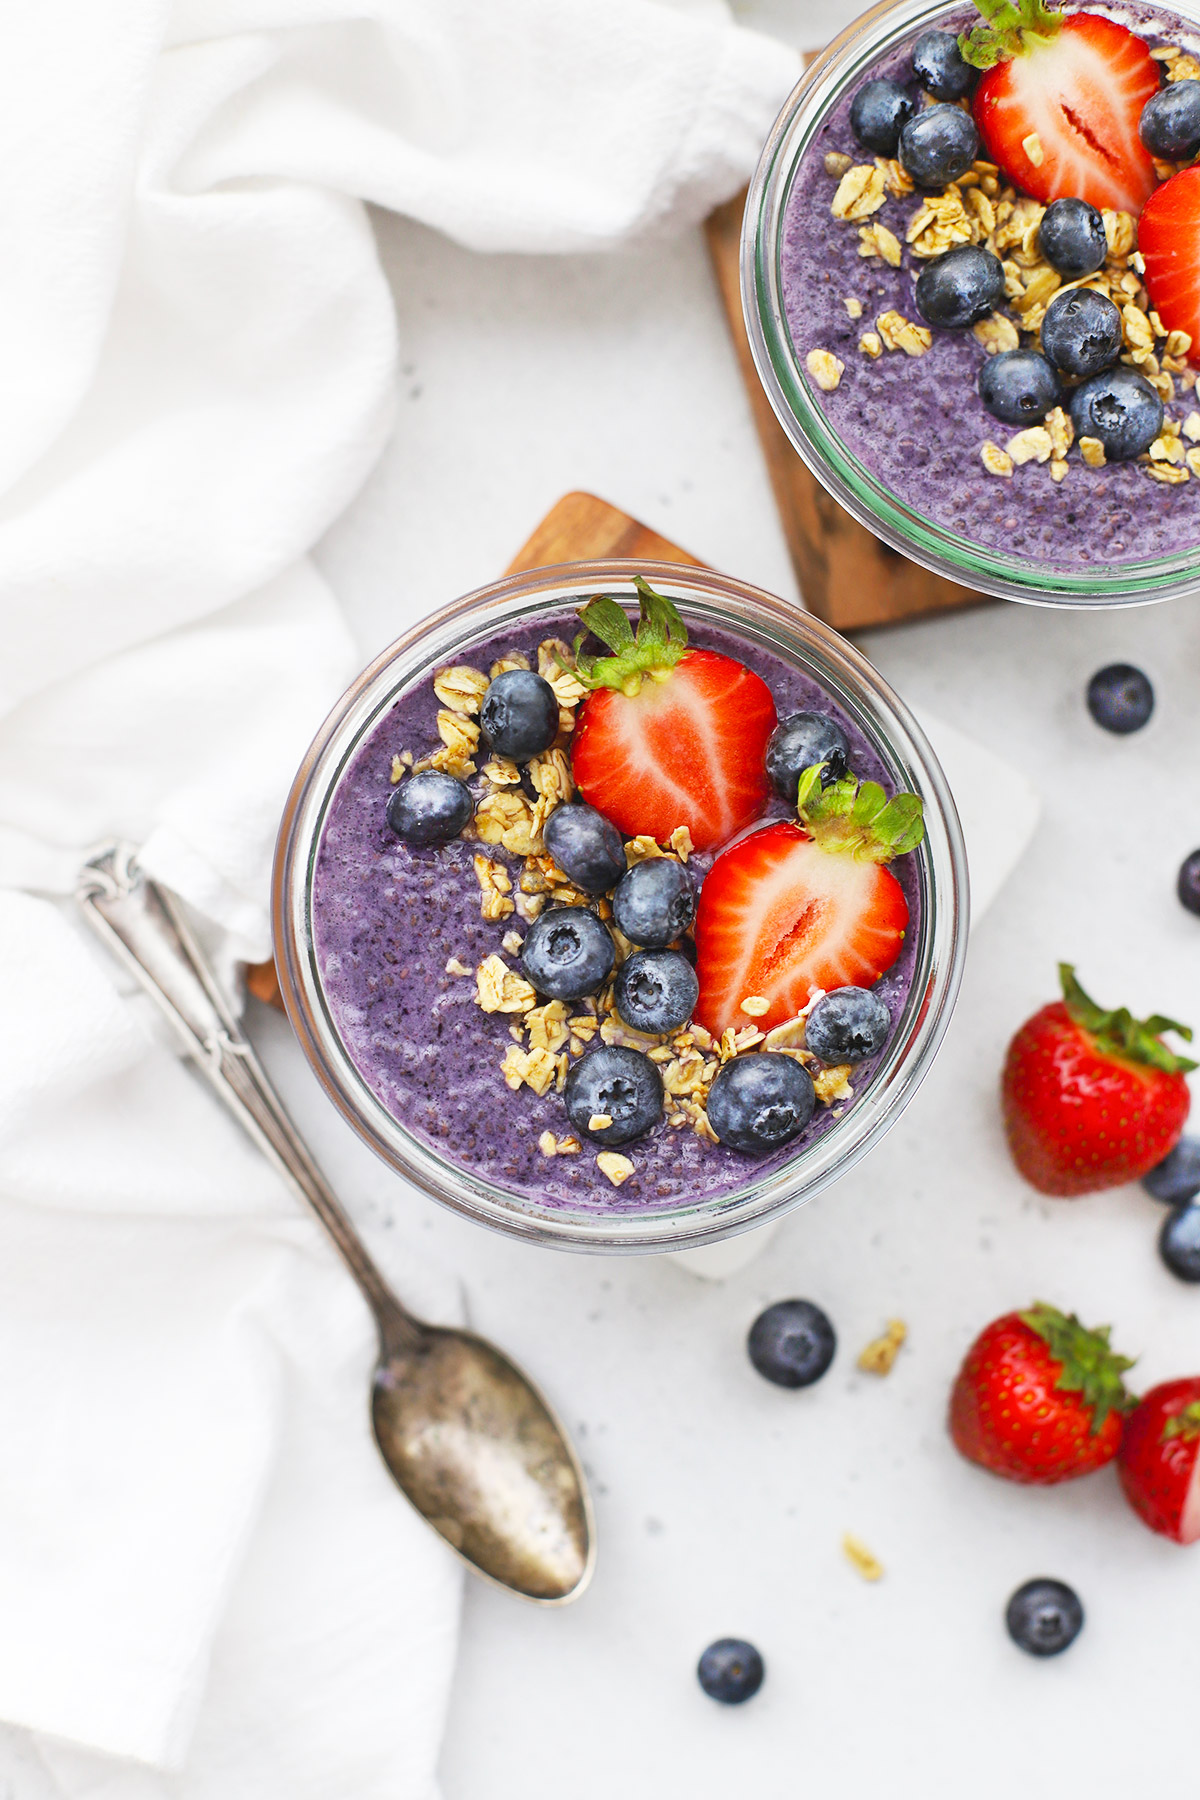 Blueberry chia pudding topped with fresh berries and granola.